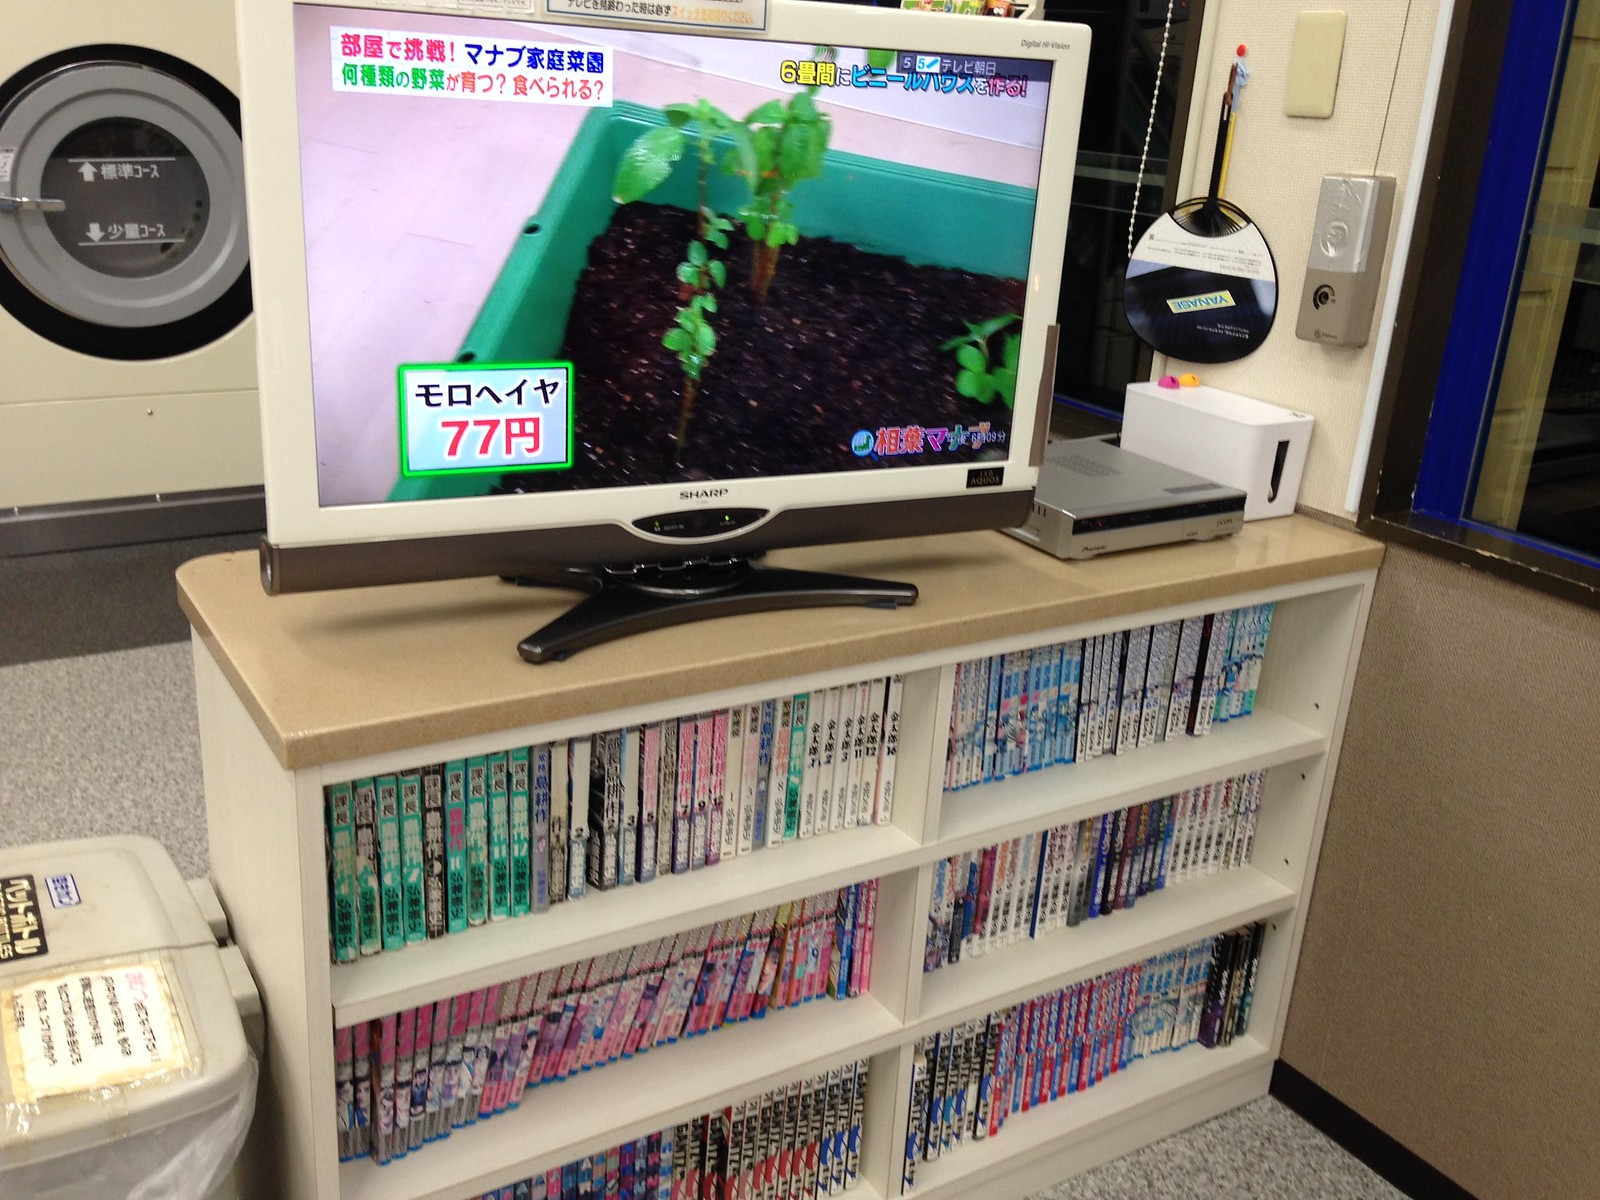 Facilities at a coin laundry in Japan much better than Japan. A TV set to watch, books to read!